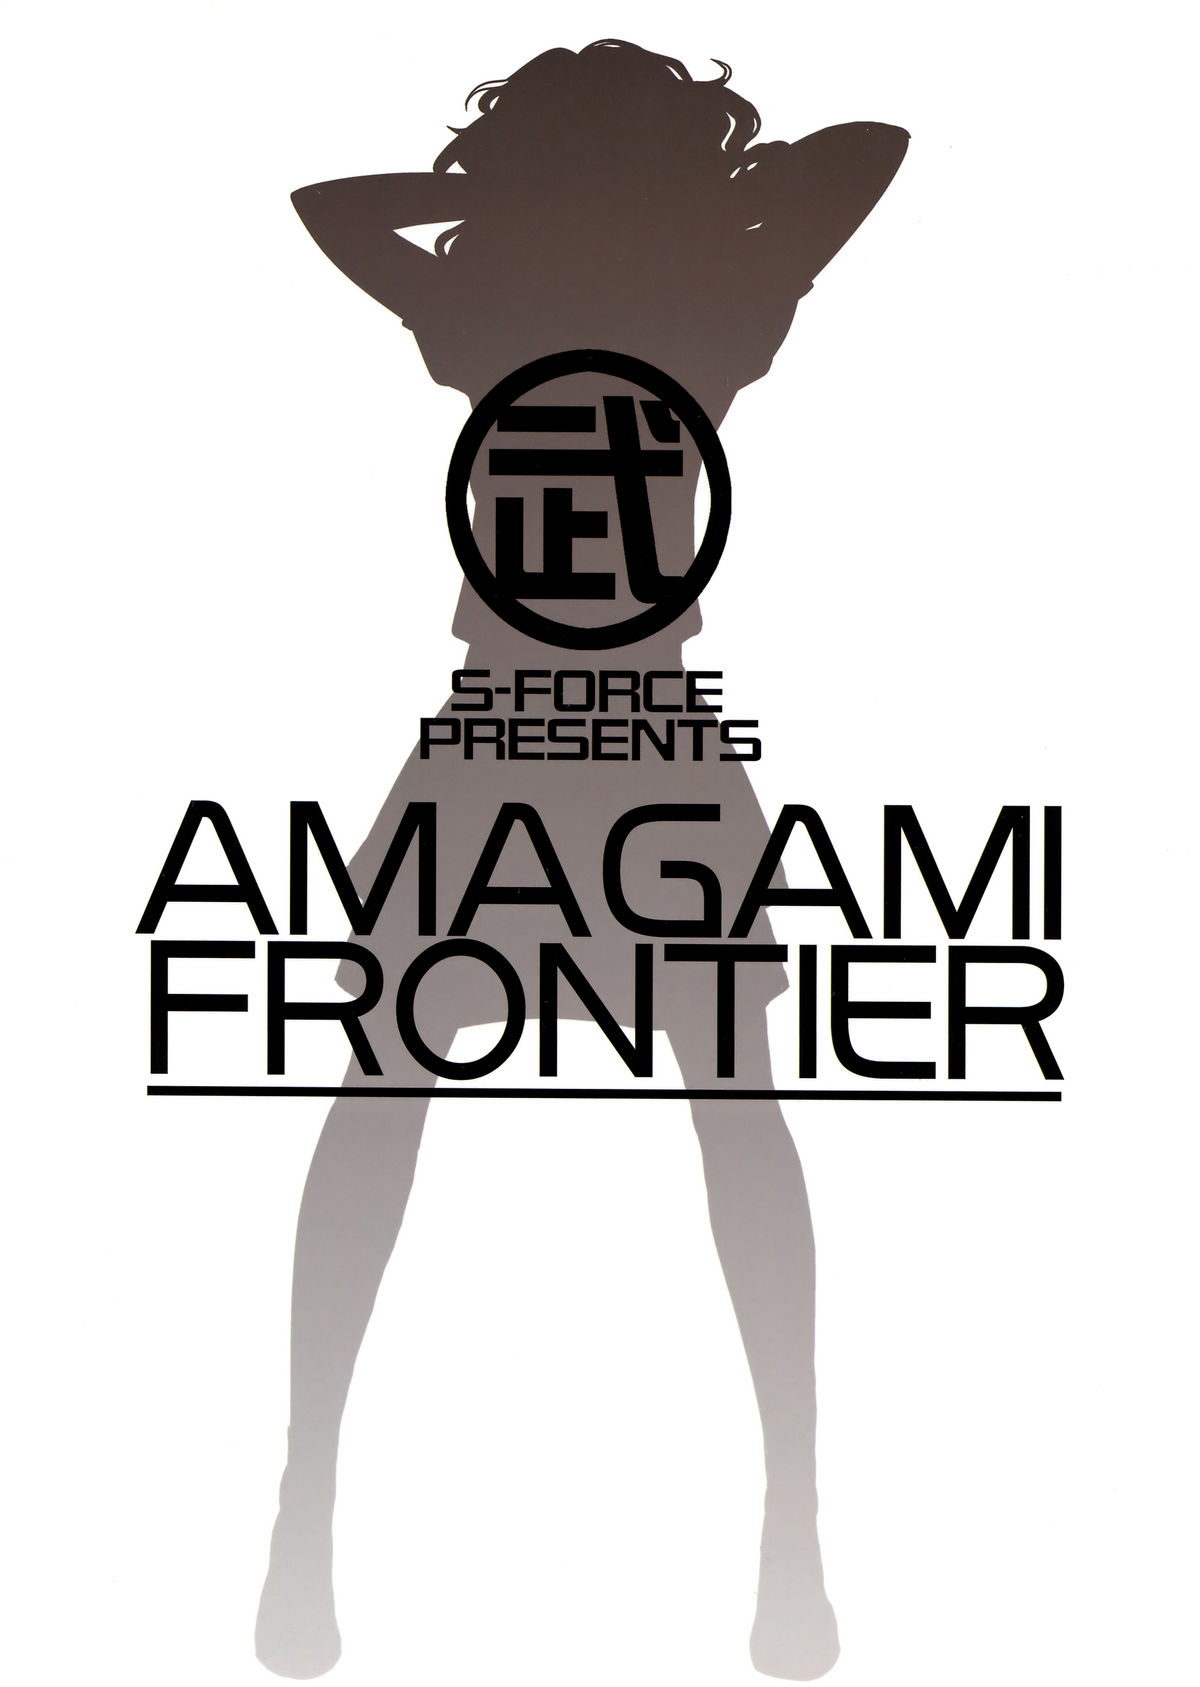 (C76) [S-FORCE (Takemasa Takeshi)] AMAGAMI FRONTIER (Amagami) (C76) (同人誌) [S-FORCE (武将)] AMAGAMI FRONTIER (アマガミ)